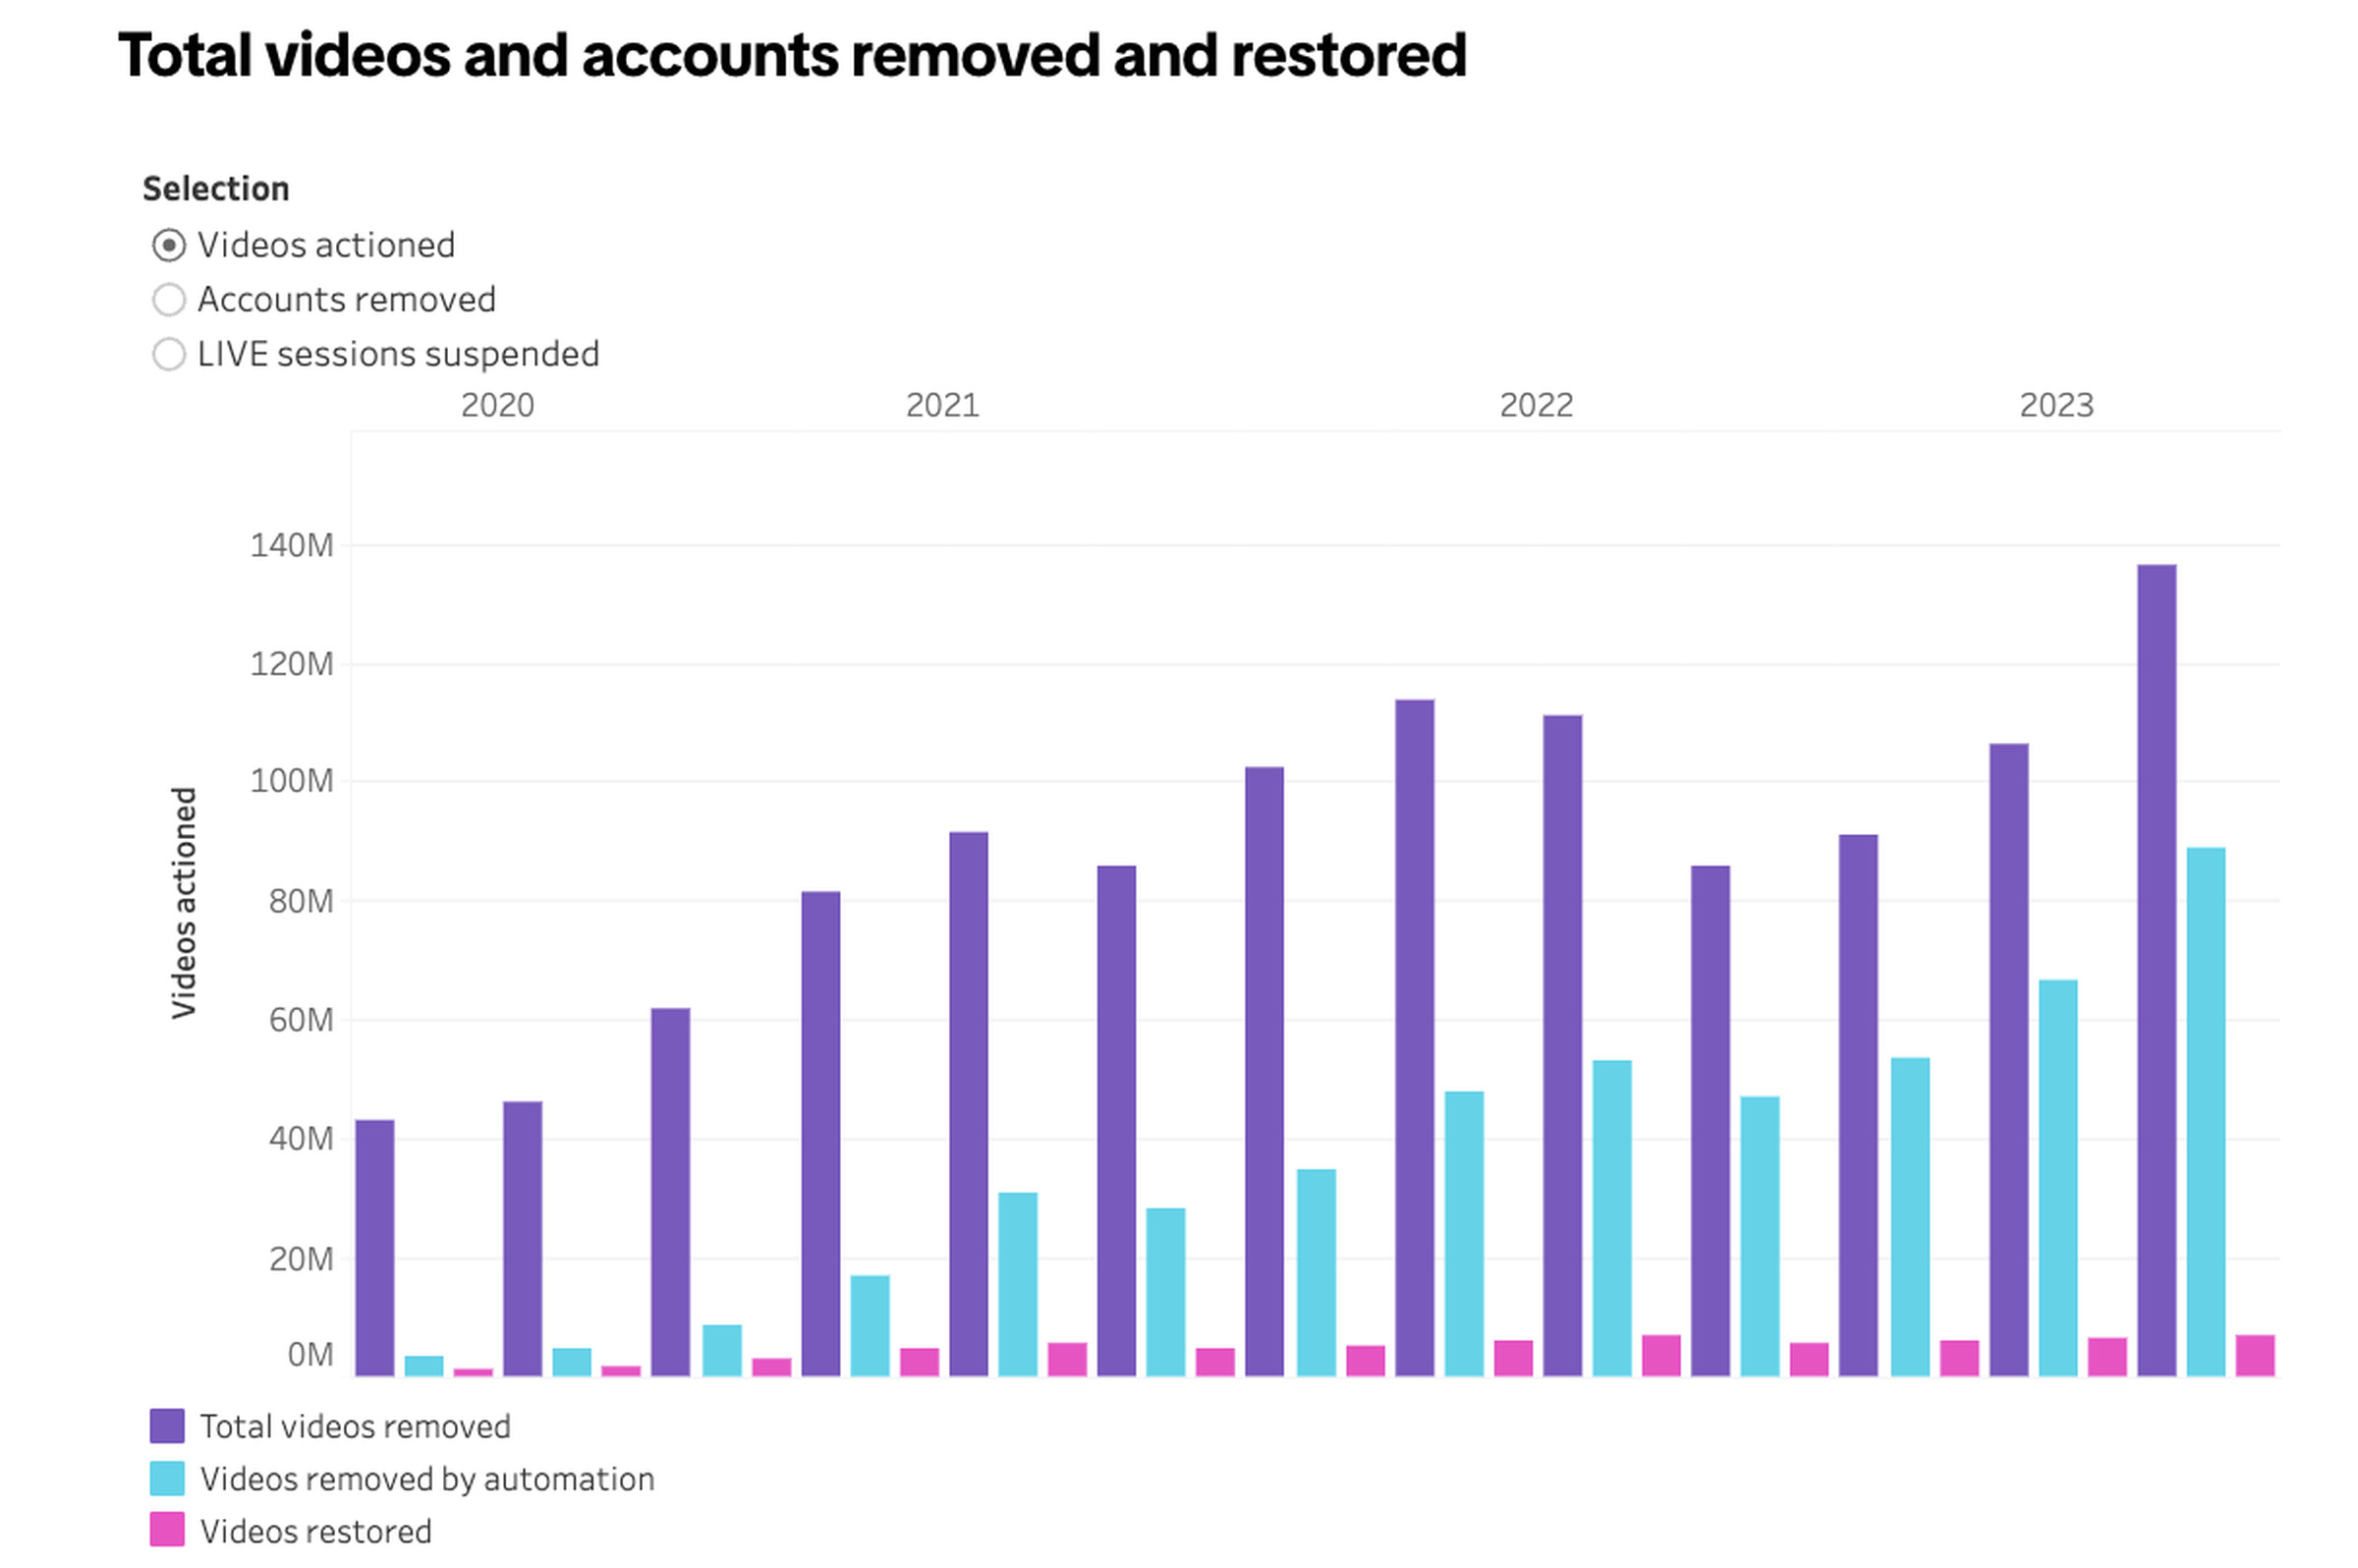 A chart showing that 136 million videos were removed in Q3 on TikTok, the highest since 2020. In the previous quarter, 106 million videos were removed.